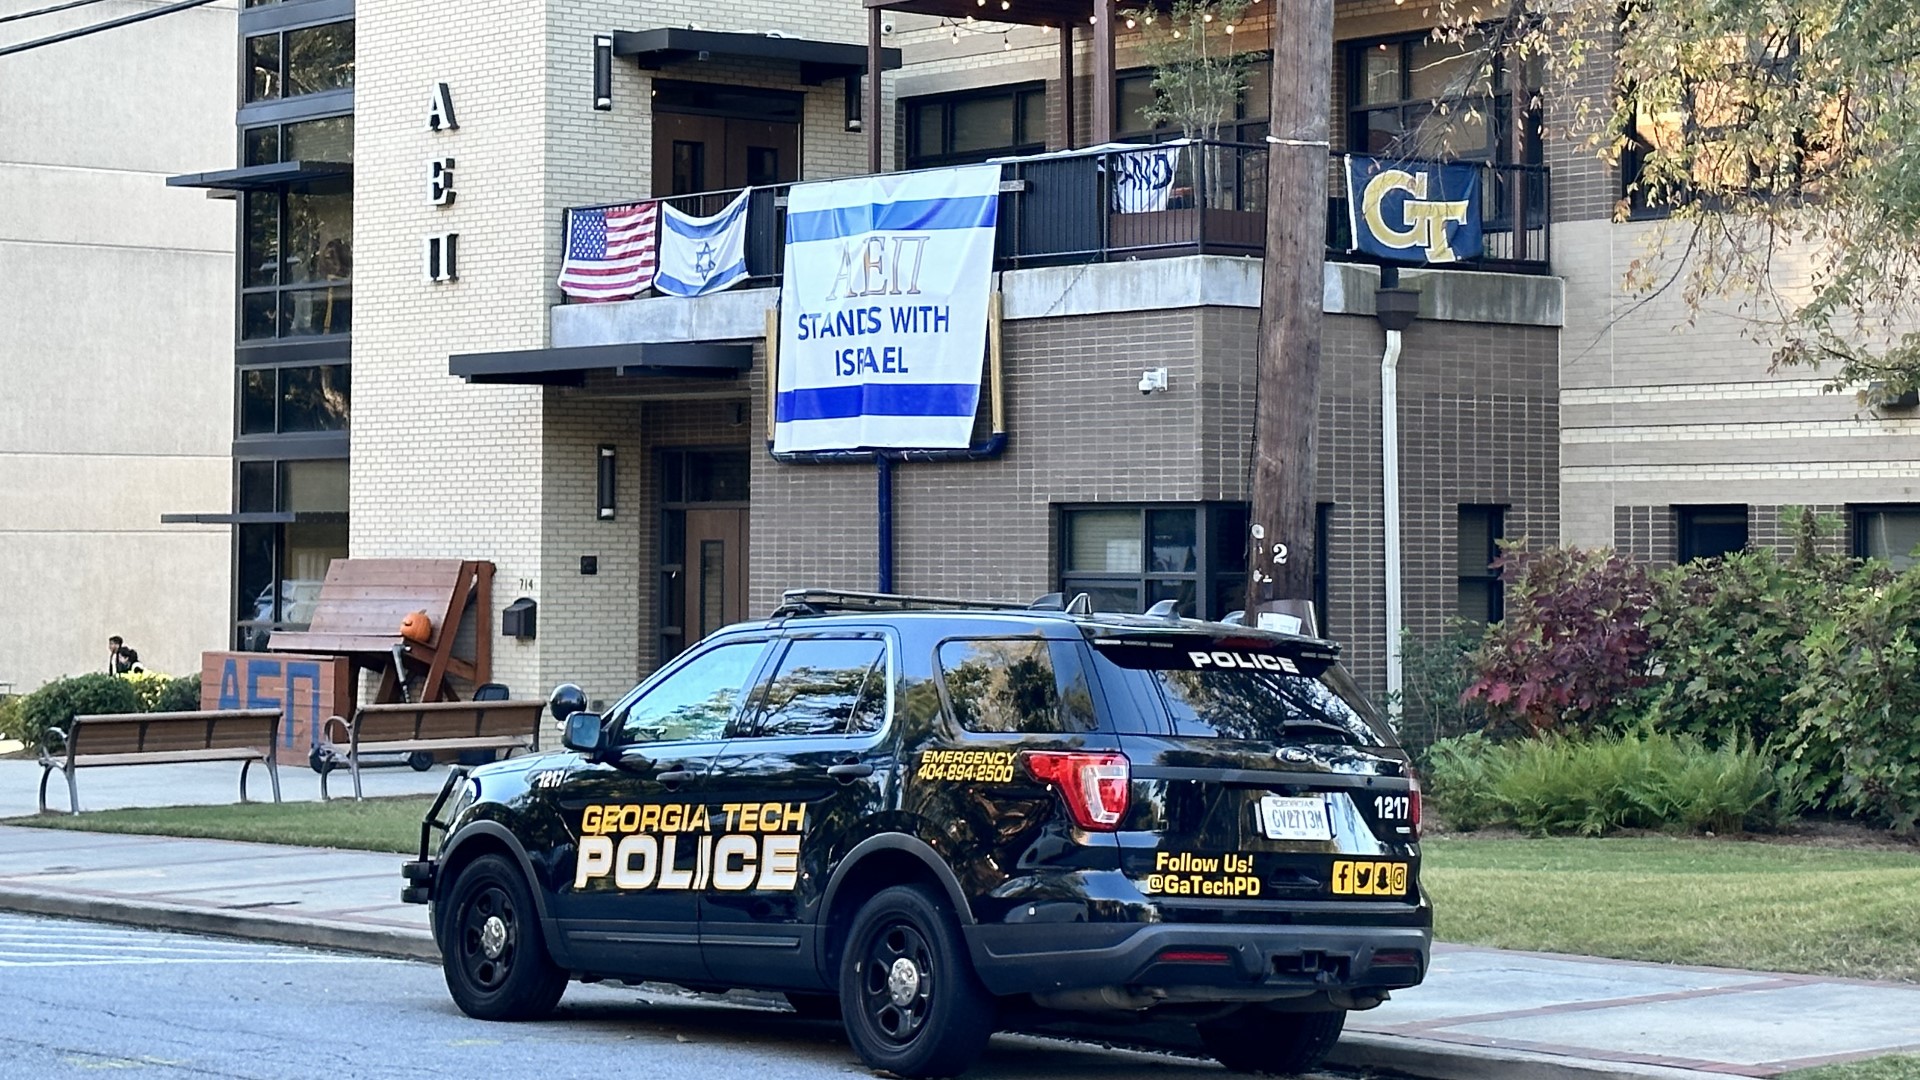 Georgia Tech Police said they are investigating vandalism to the Alpha Epsilon Pi Fraternity house.